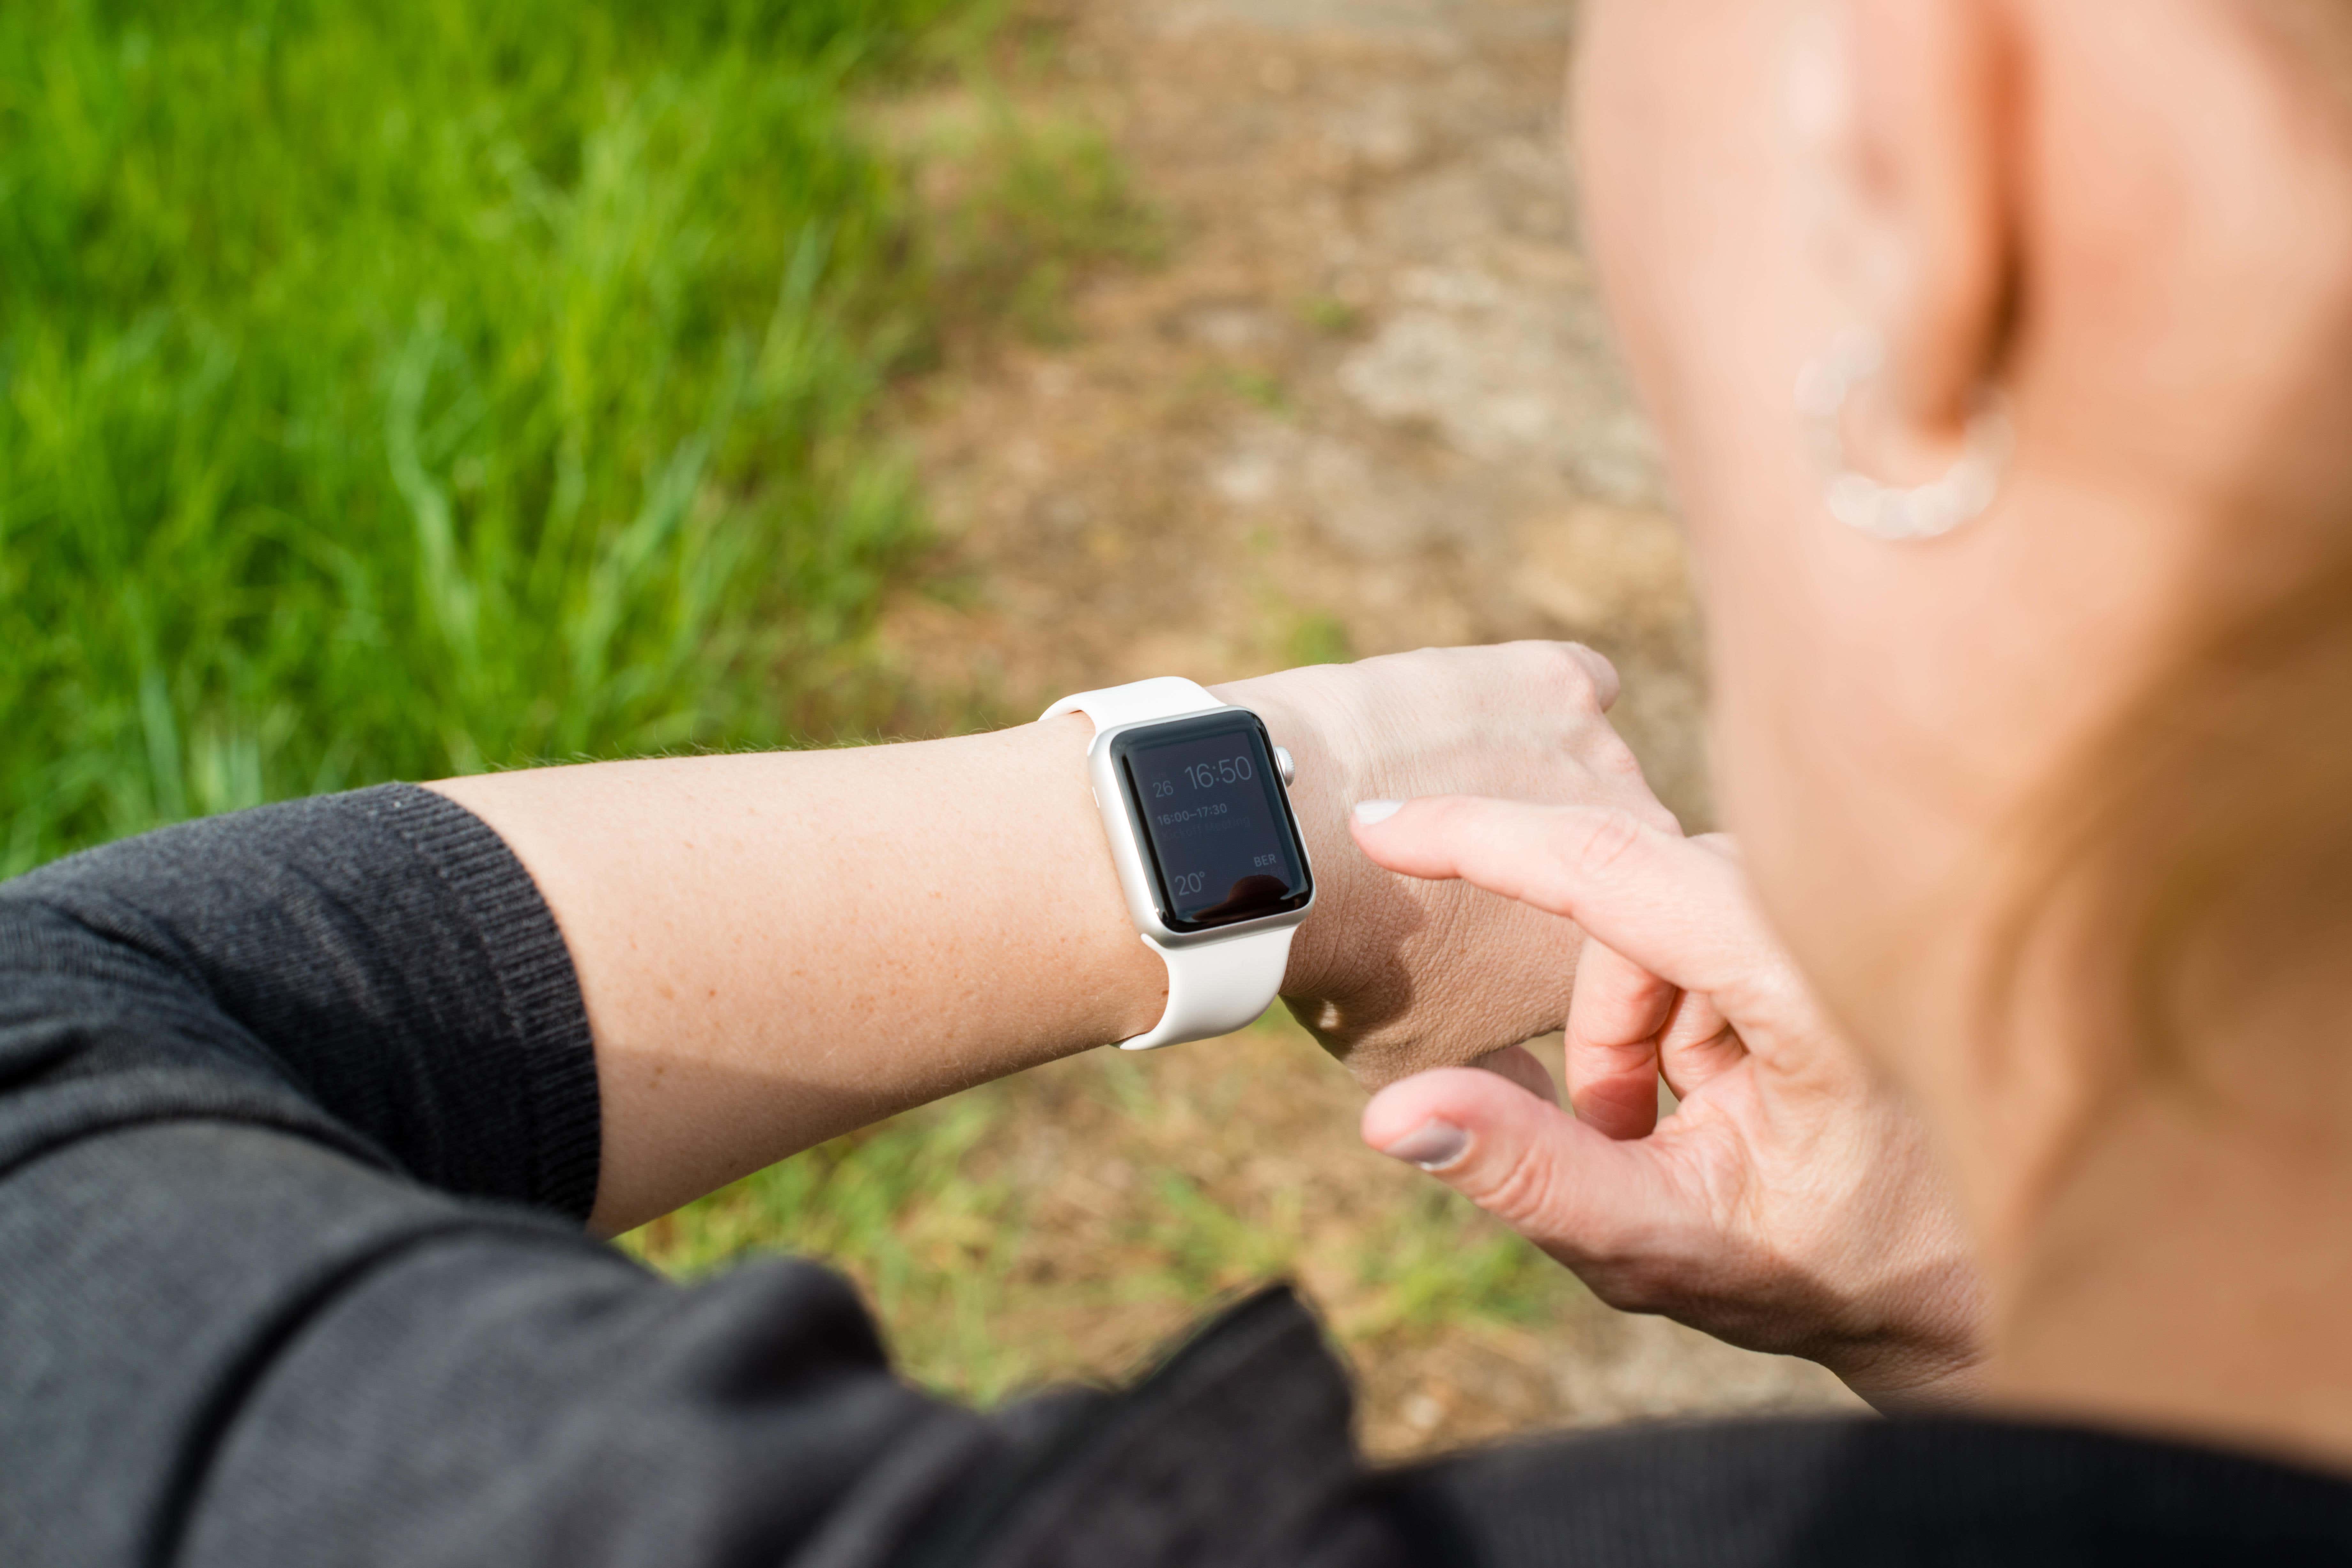 Using a smartwatch to help detect the progression of Parkinson's disease